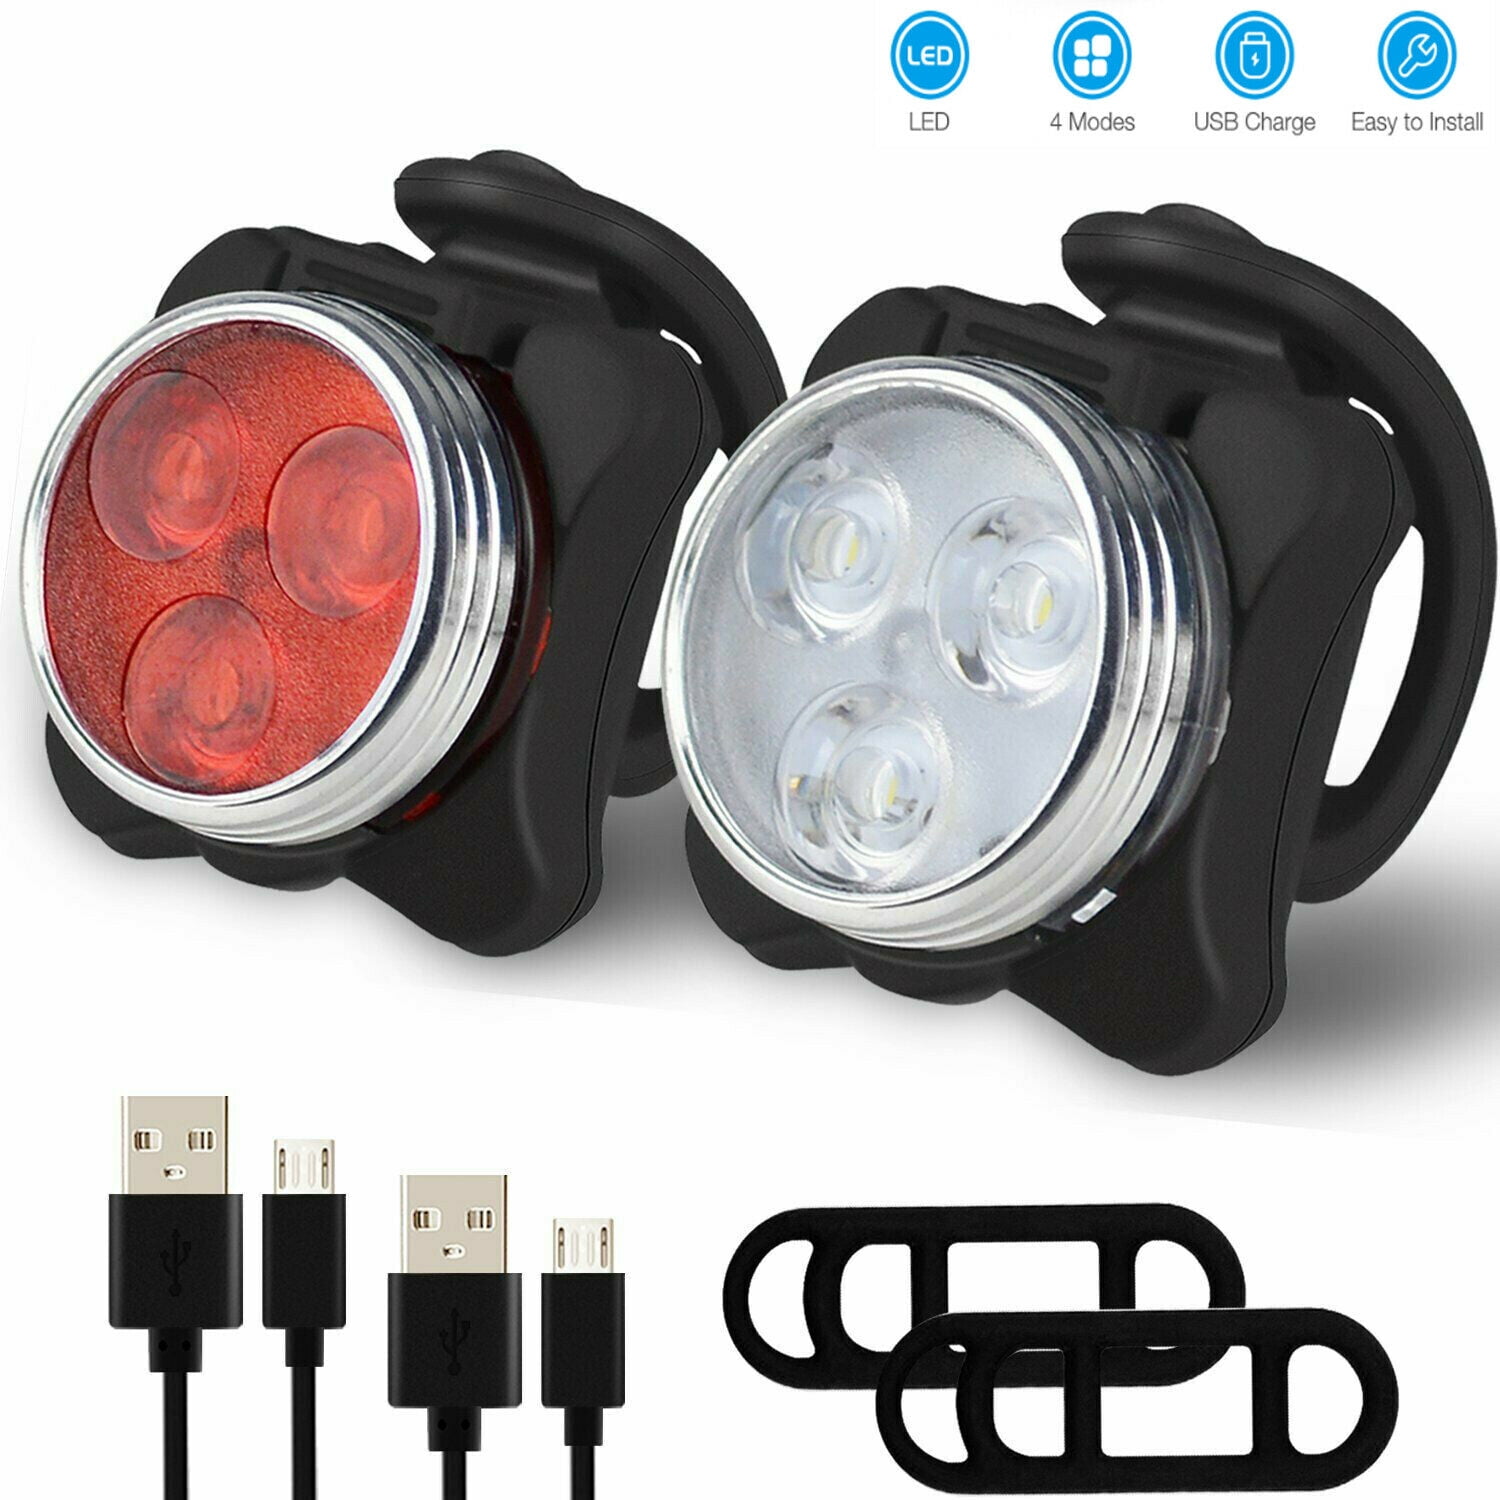 Details about   USB Rechargeable LED Bicycle Bike Front Rear Light Set Headlight Taillight Lamps 